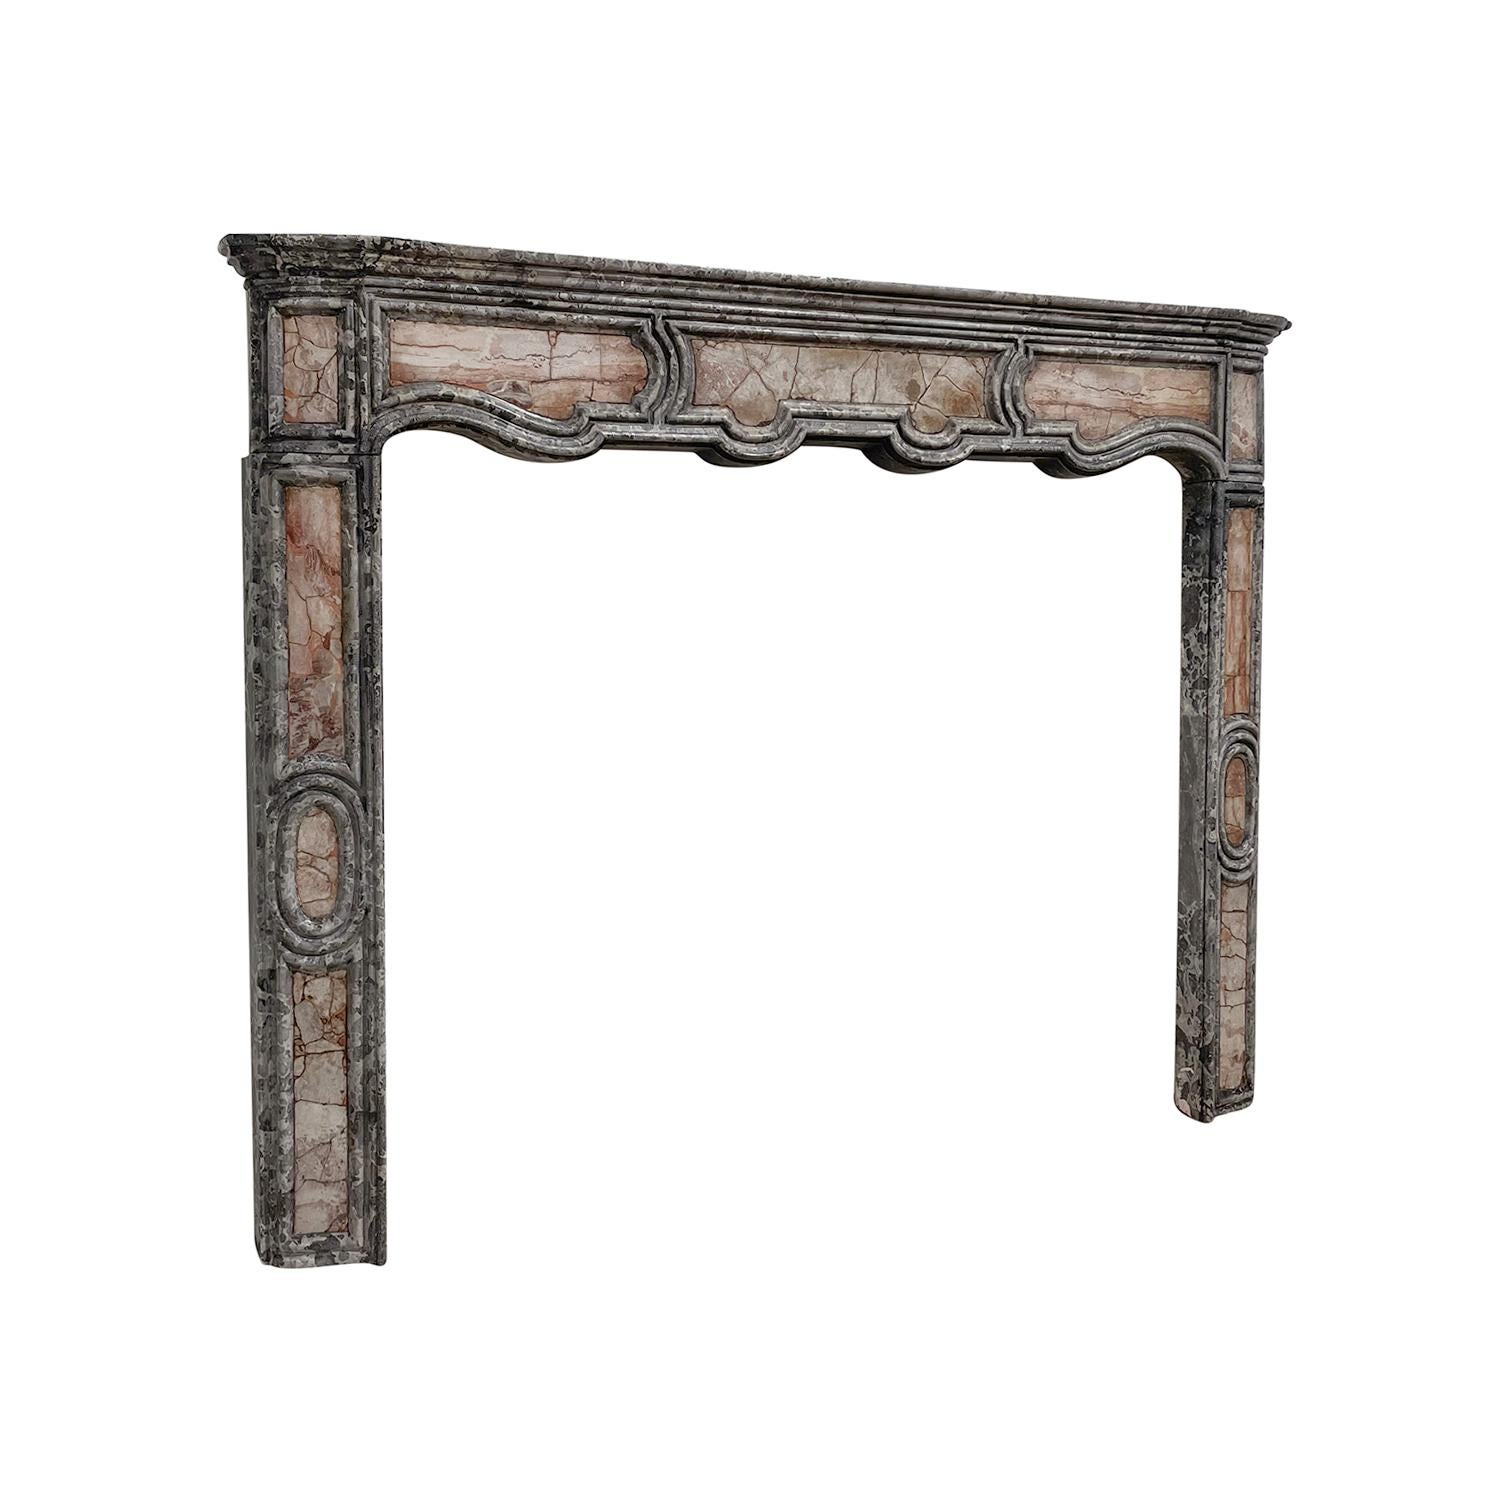 An antique French, XIV slim fireplace mantel made of hand crafted marble, in good condition. The serpentine moulded frieze of the fireplace surround is supported by two detailed carved panelled jambs. Wear consistent with age and use. Circa 1740 -